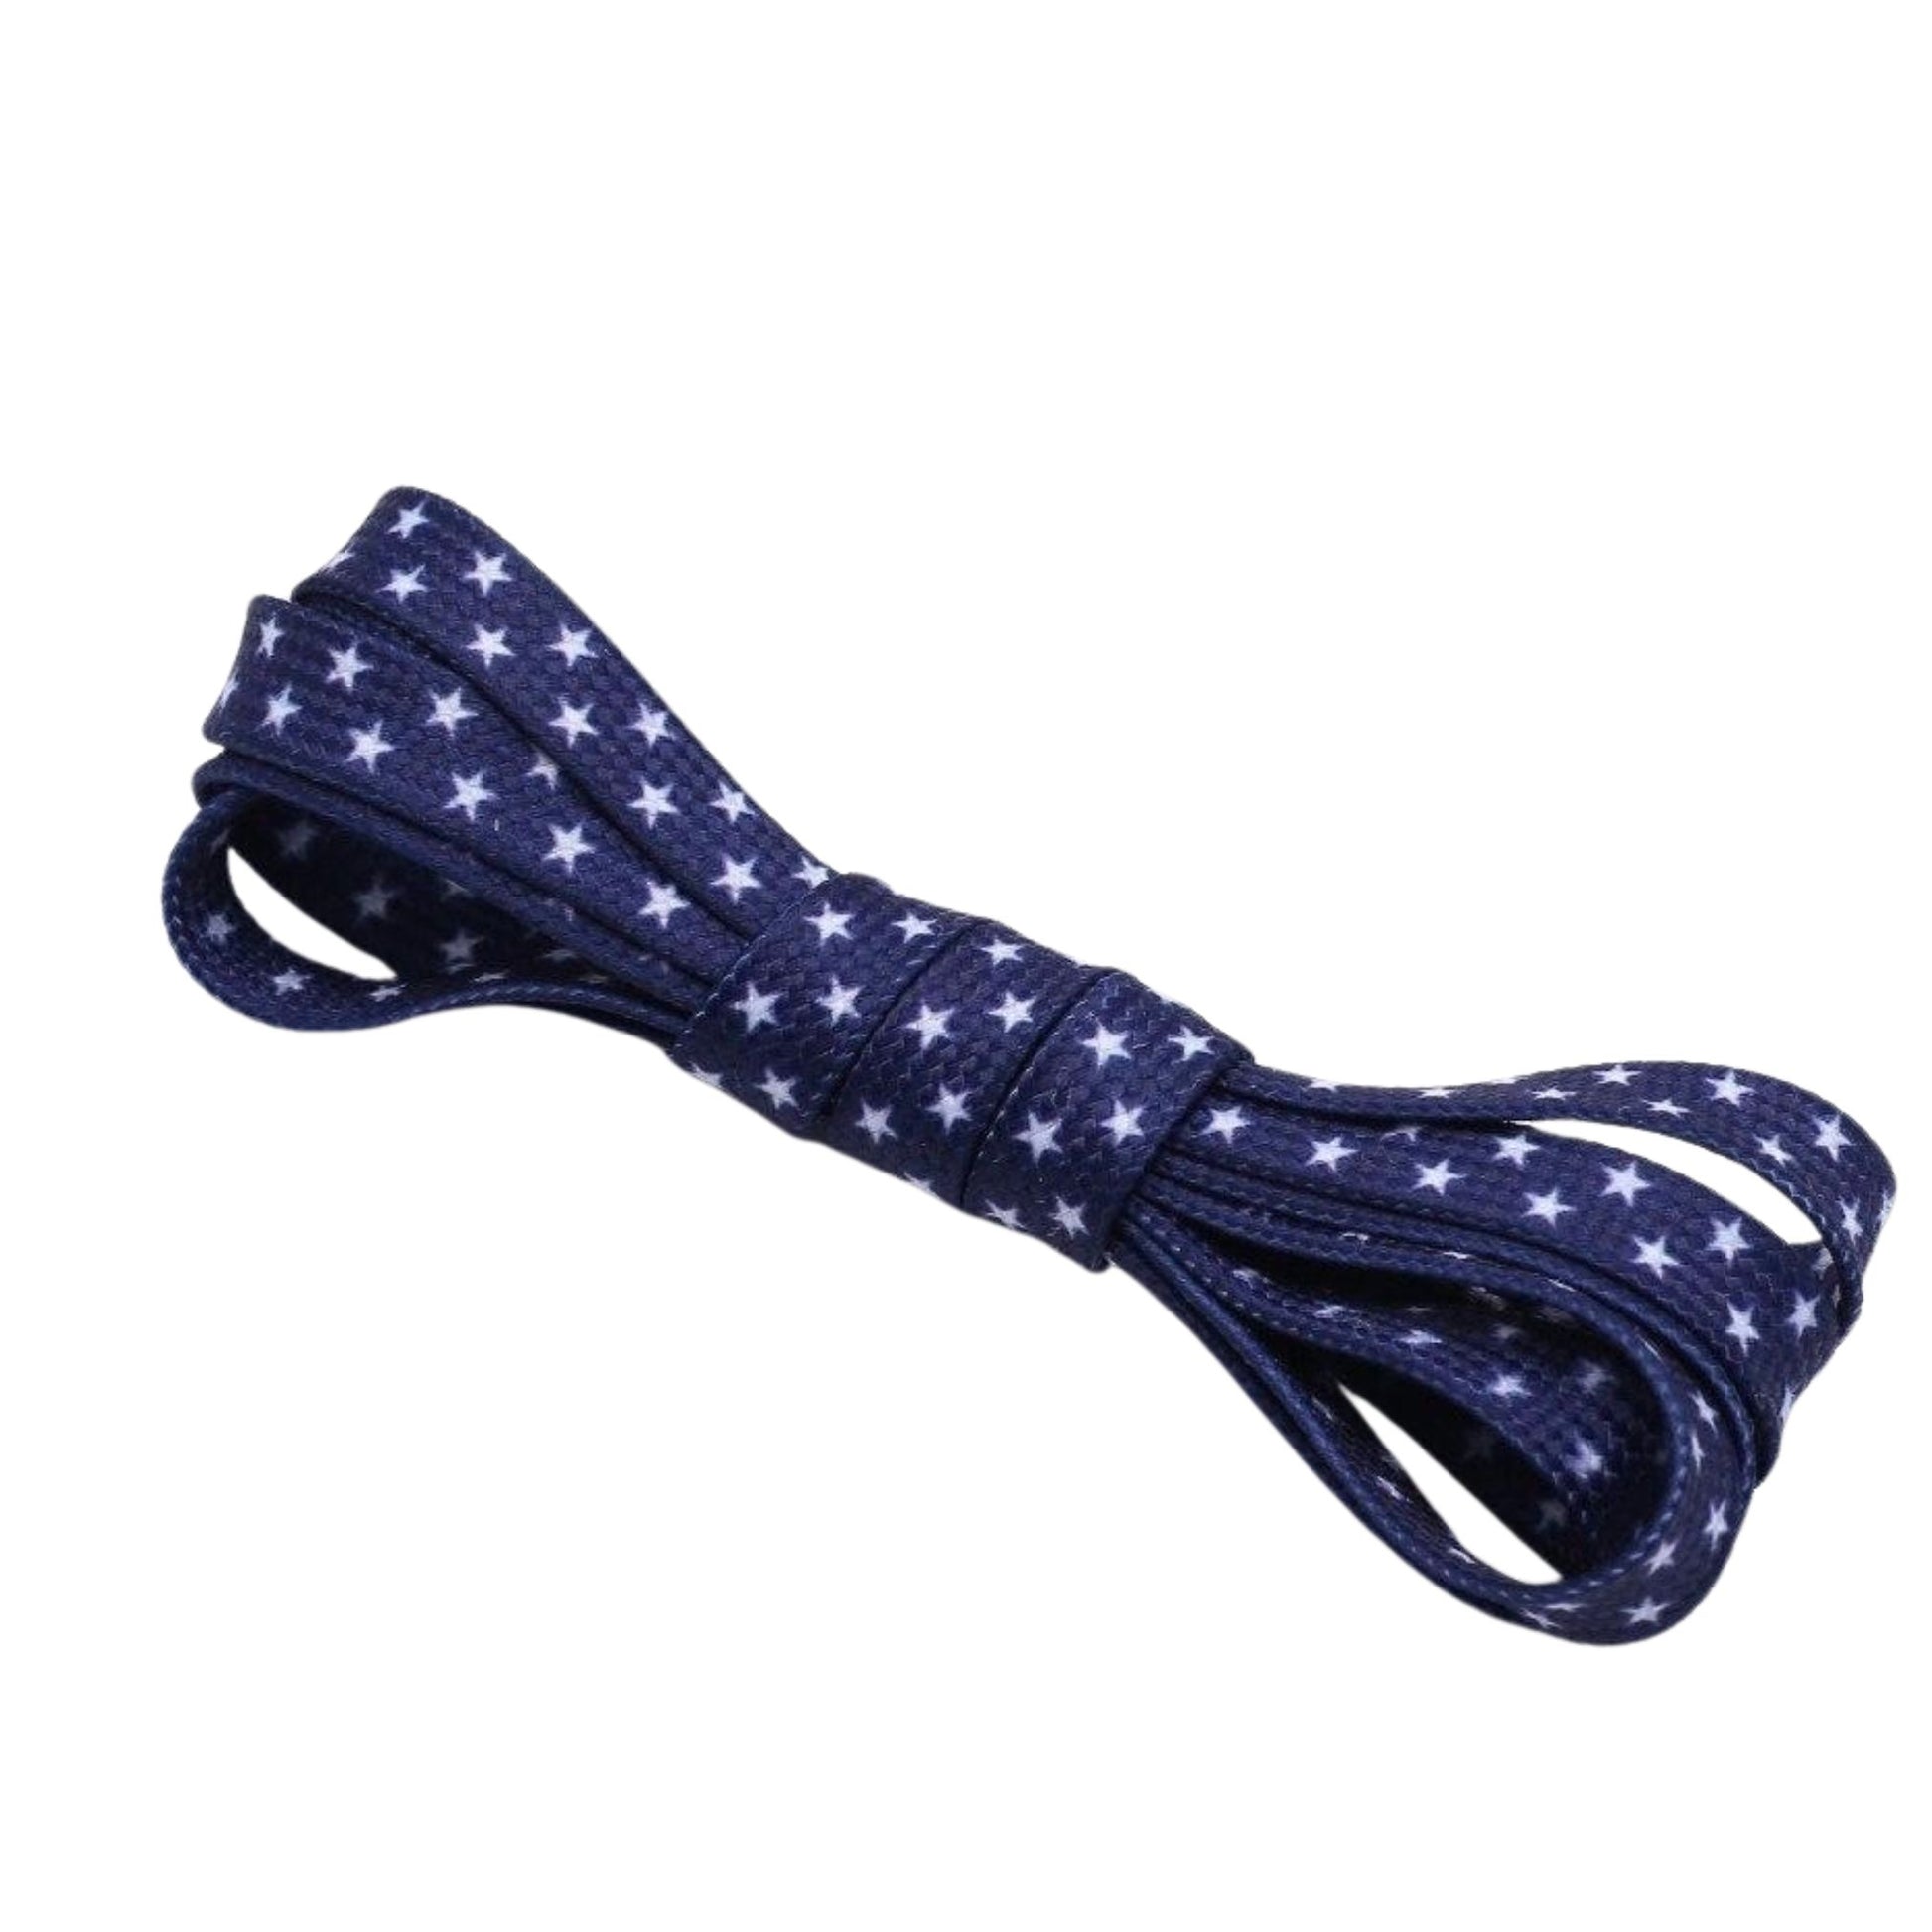 Star design shoelaces. Featuring a navy blue background with white stars